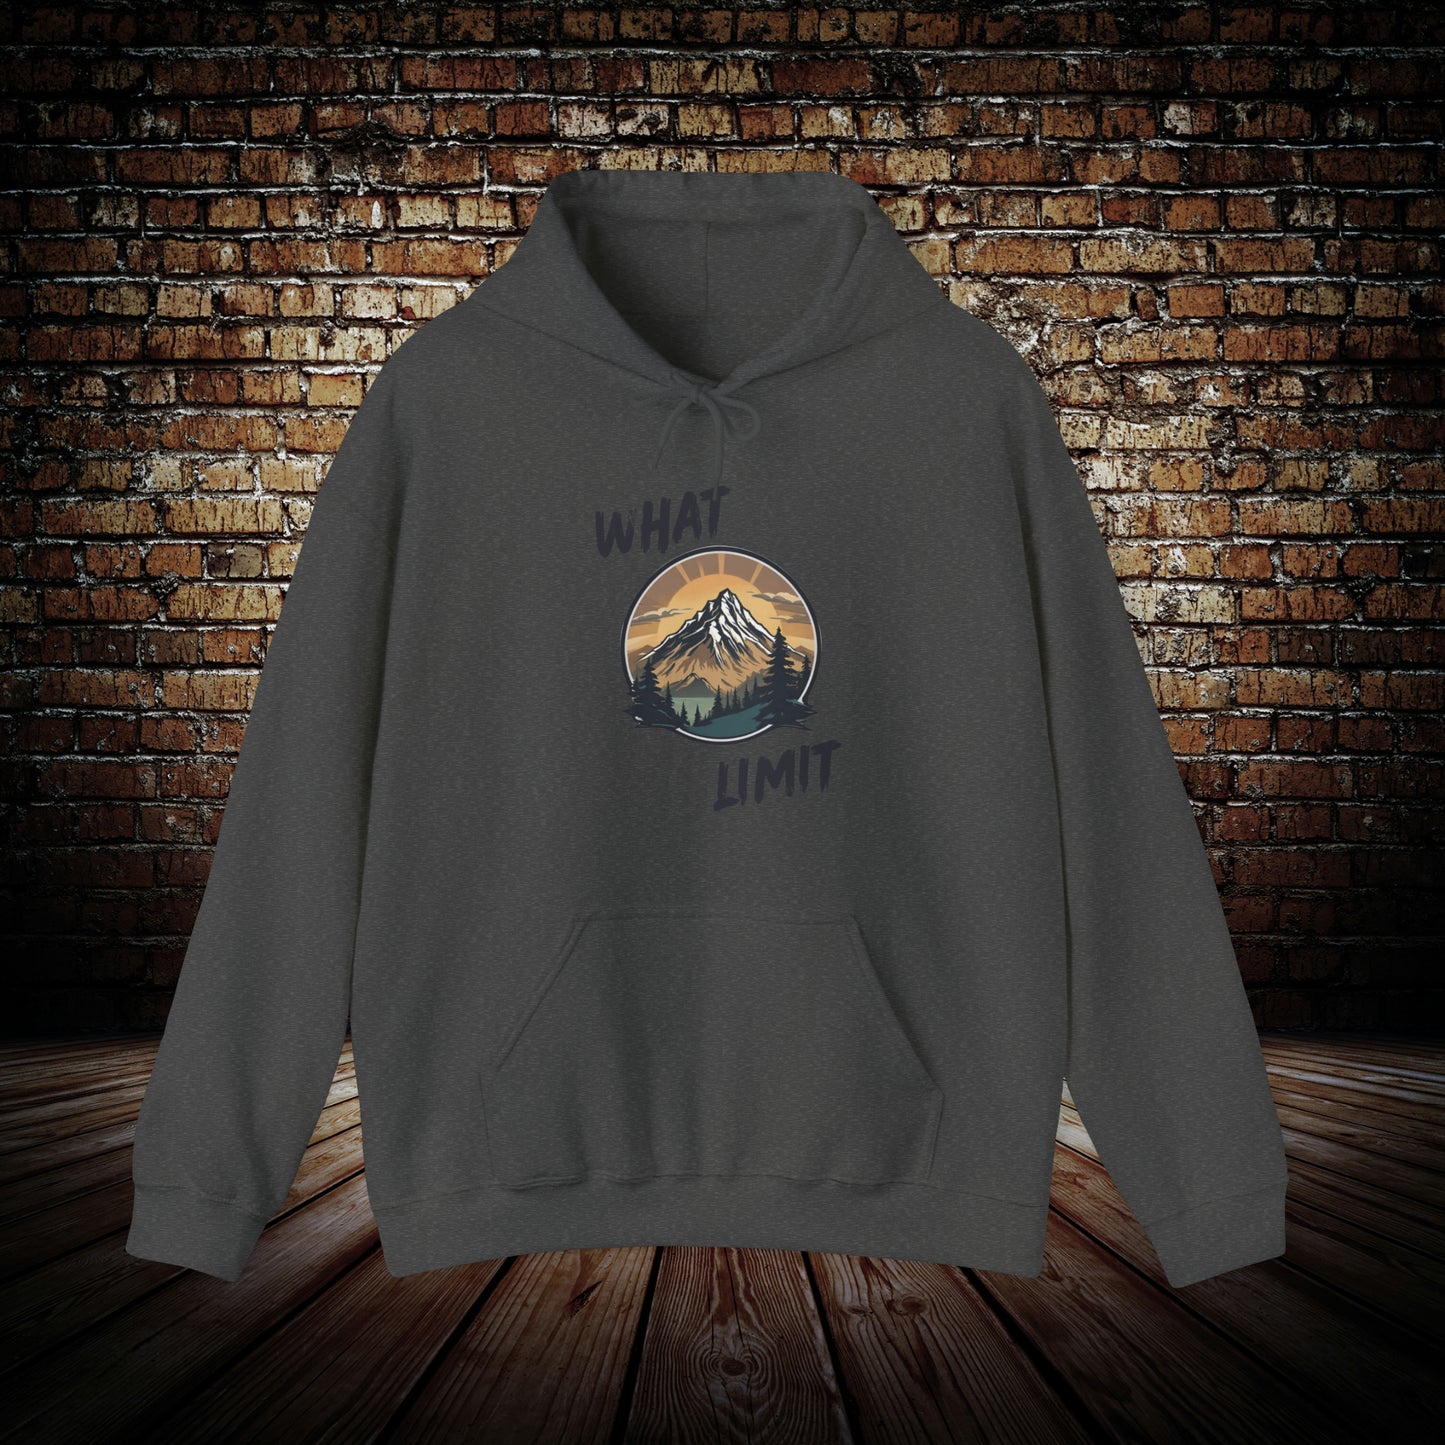 WHAT LIMIT Mountain view Motivational Hoodie